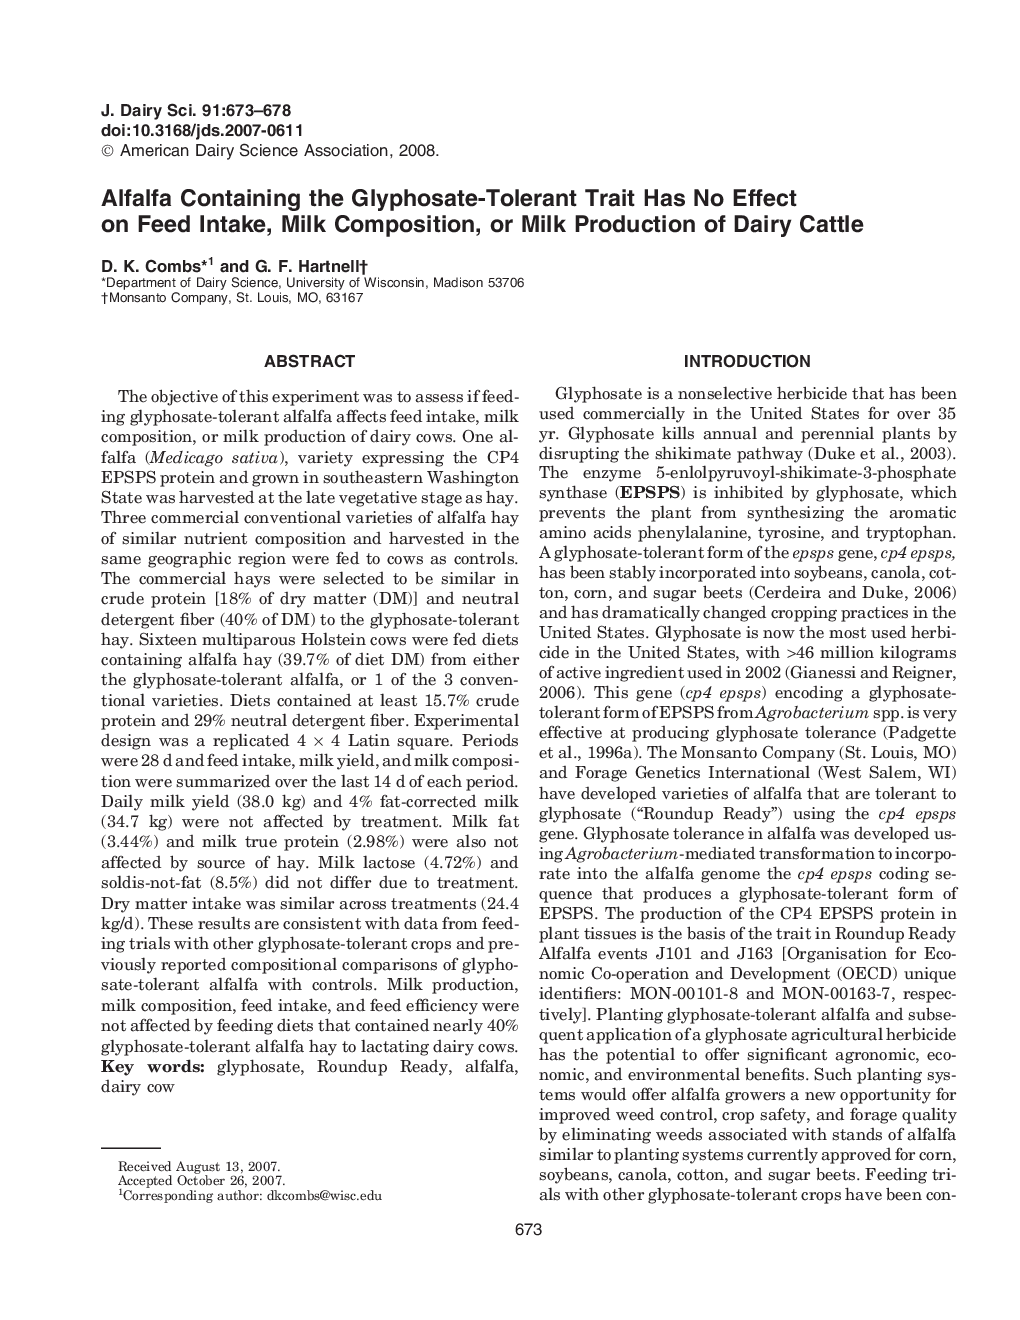 Alfalfa Containing the Glyphosate-Tolerant Trait Has No Effect on Feed Intake, Milk Composition, or Milk Production of Dairy Cattle